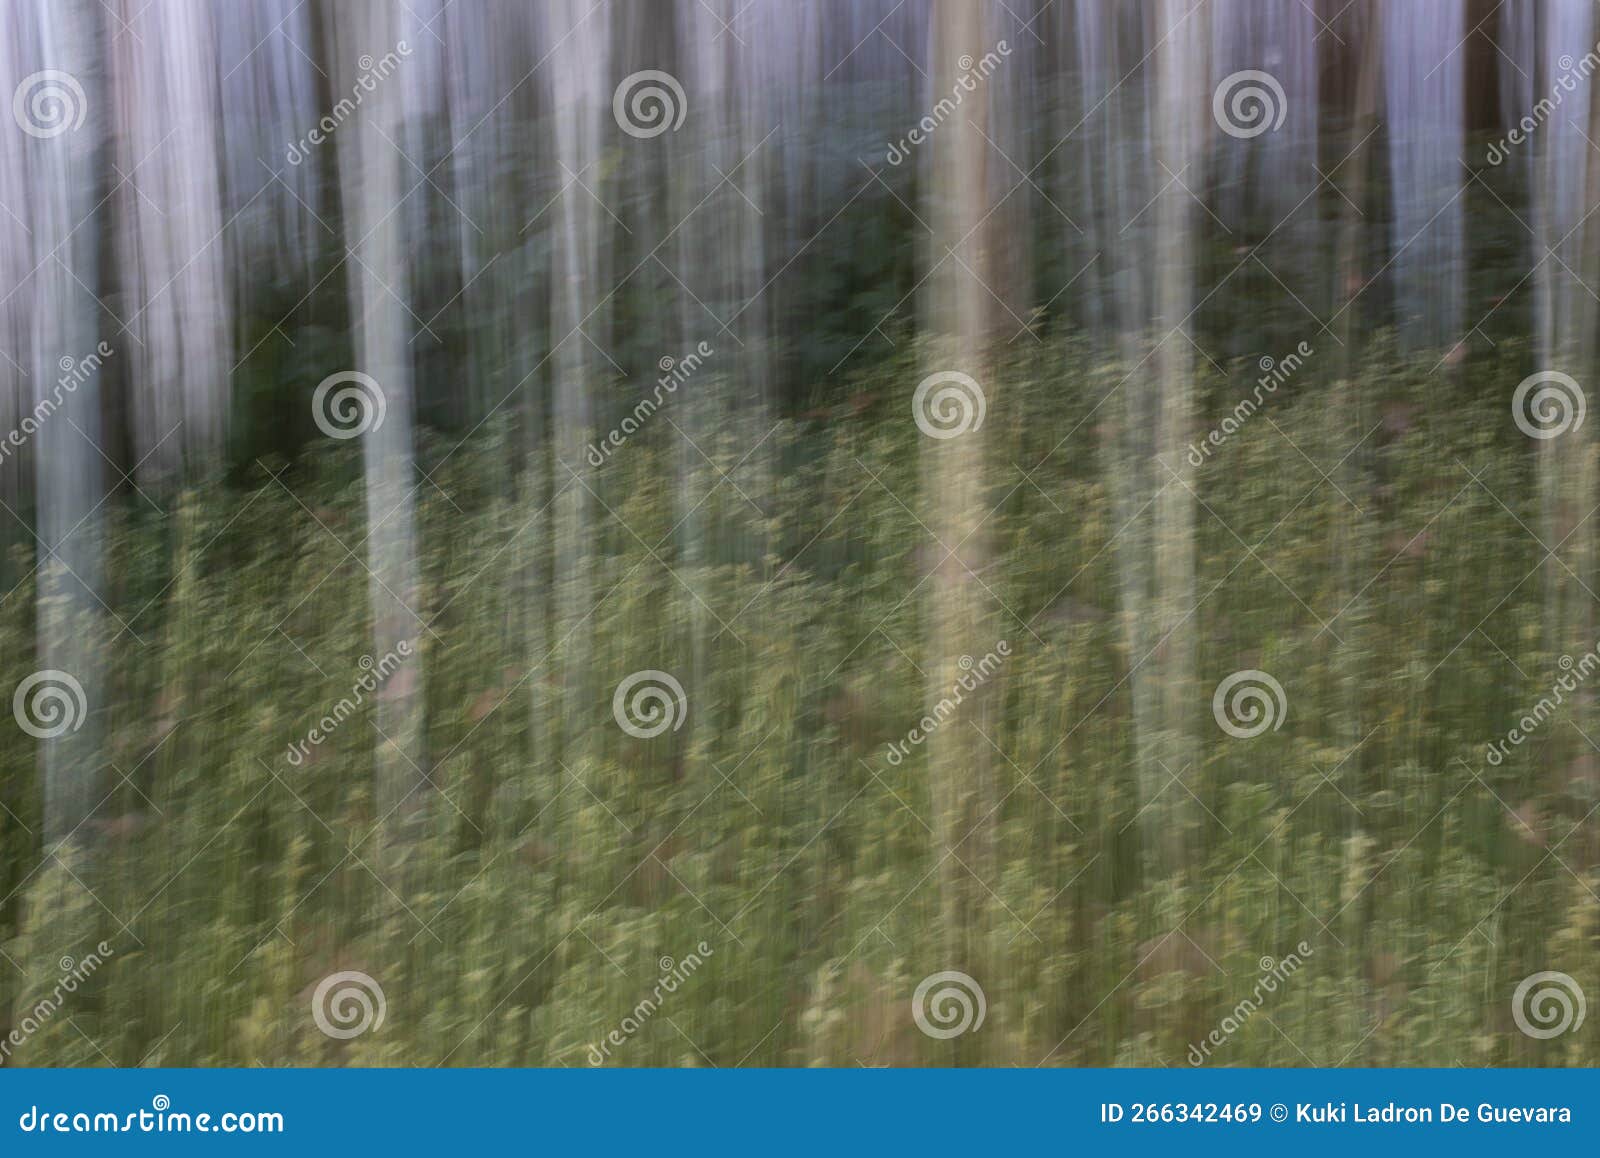 trees in the forest, icm, intentional camera movement